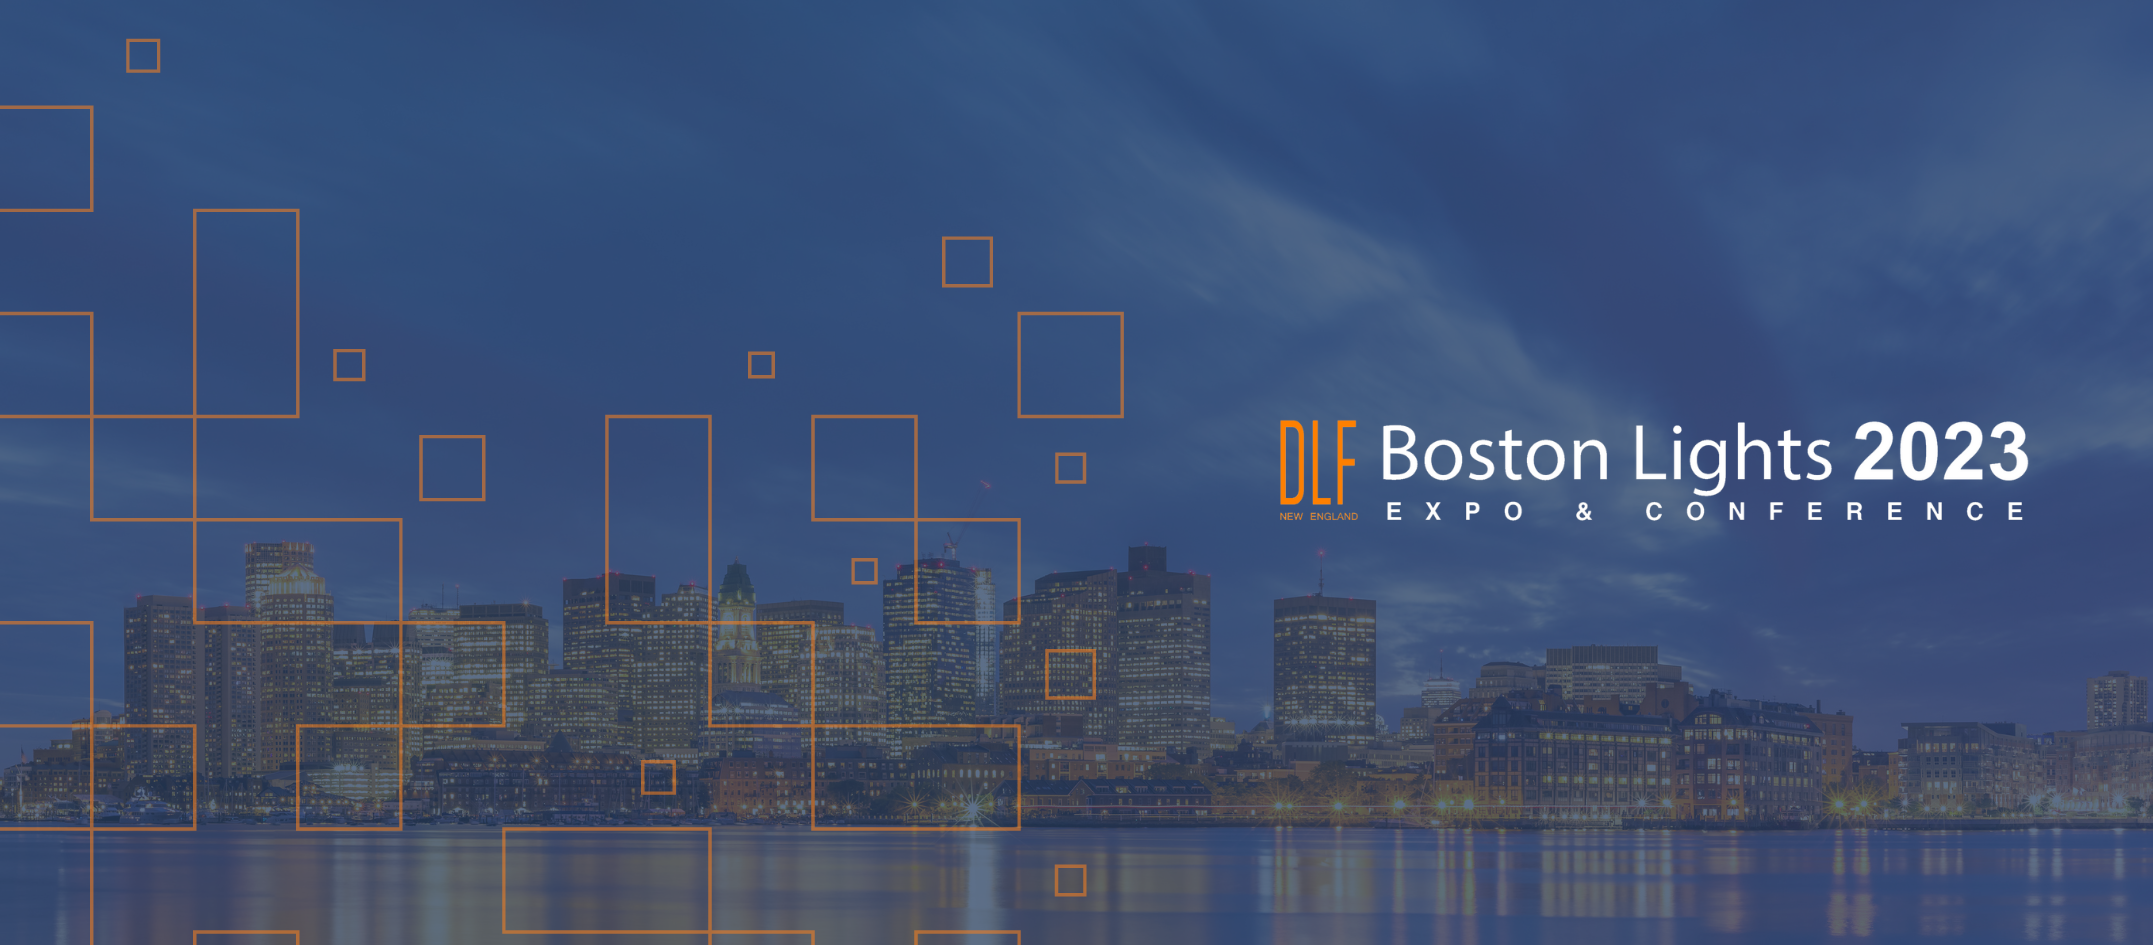 Boston Lights Expo & Conference